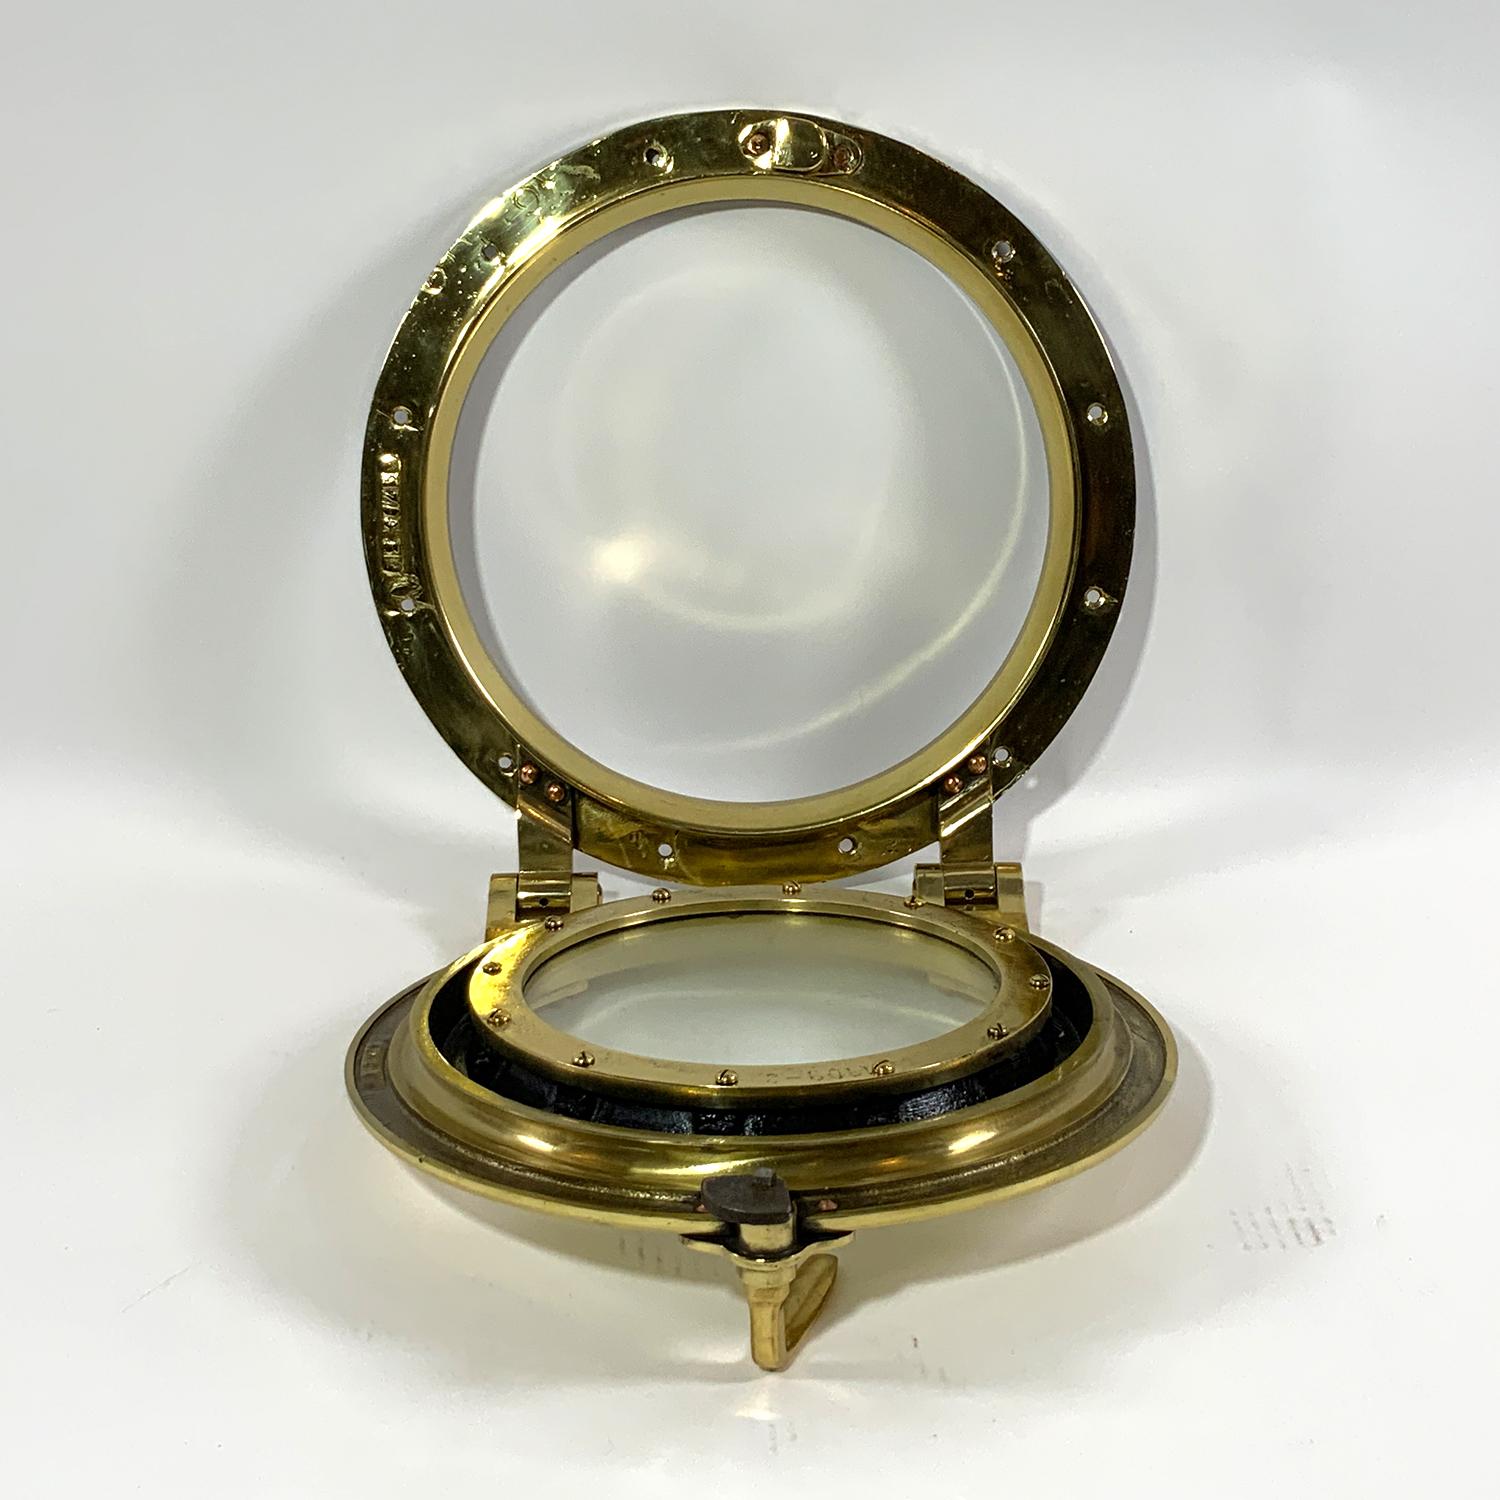 Polished Yacht Porthole Solid Brass Highest Quality For Sale